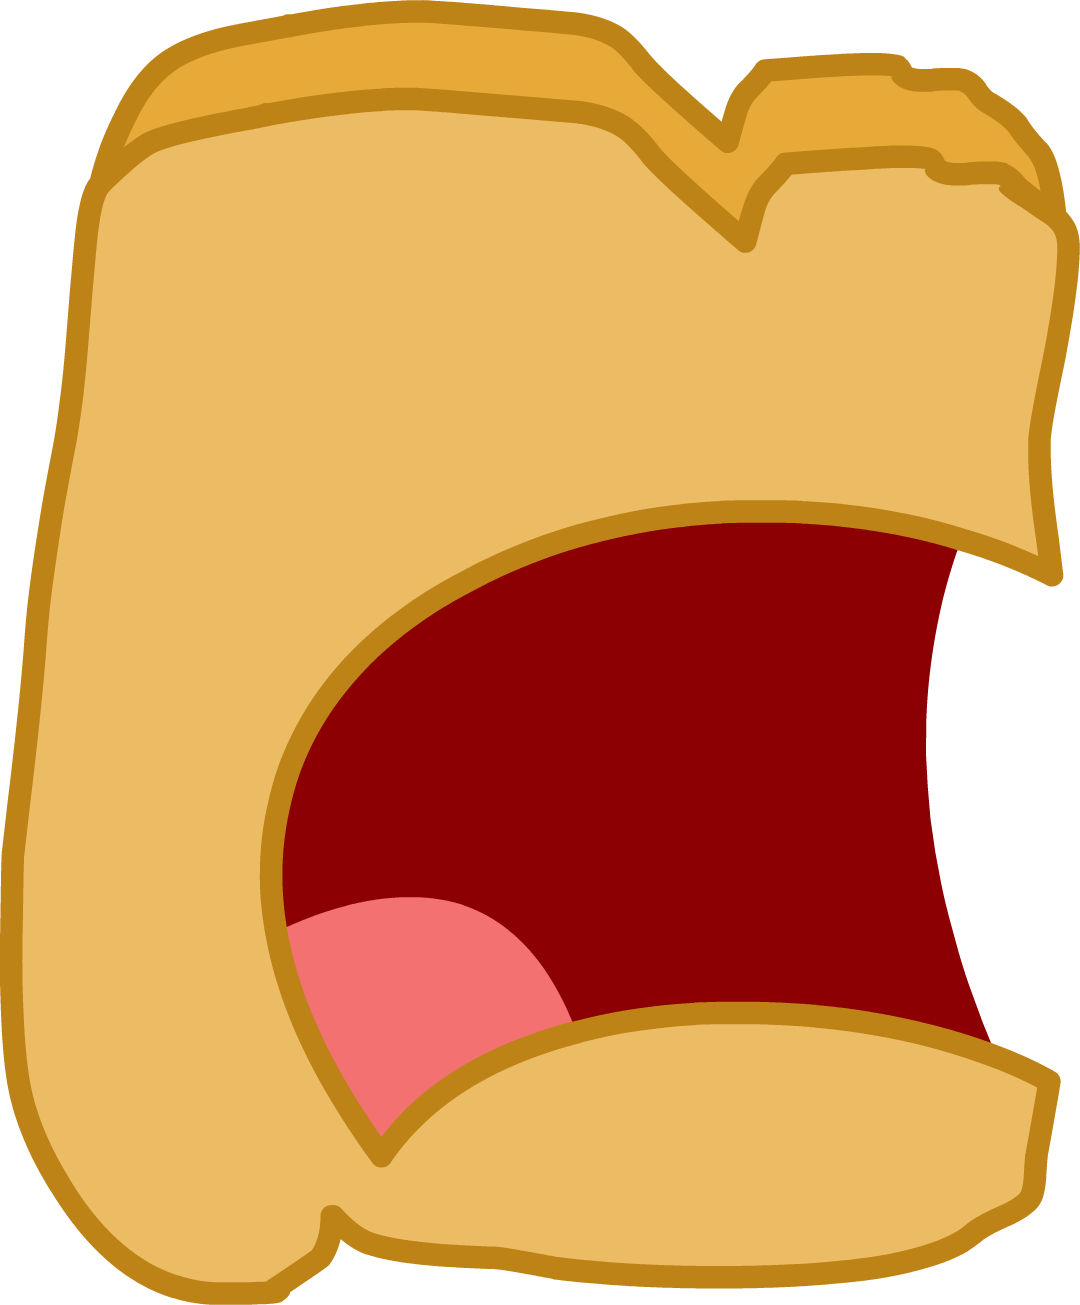 Old Woody Screaming - Bfdi Woody Asset (1080x1305)